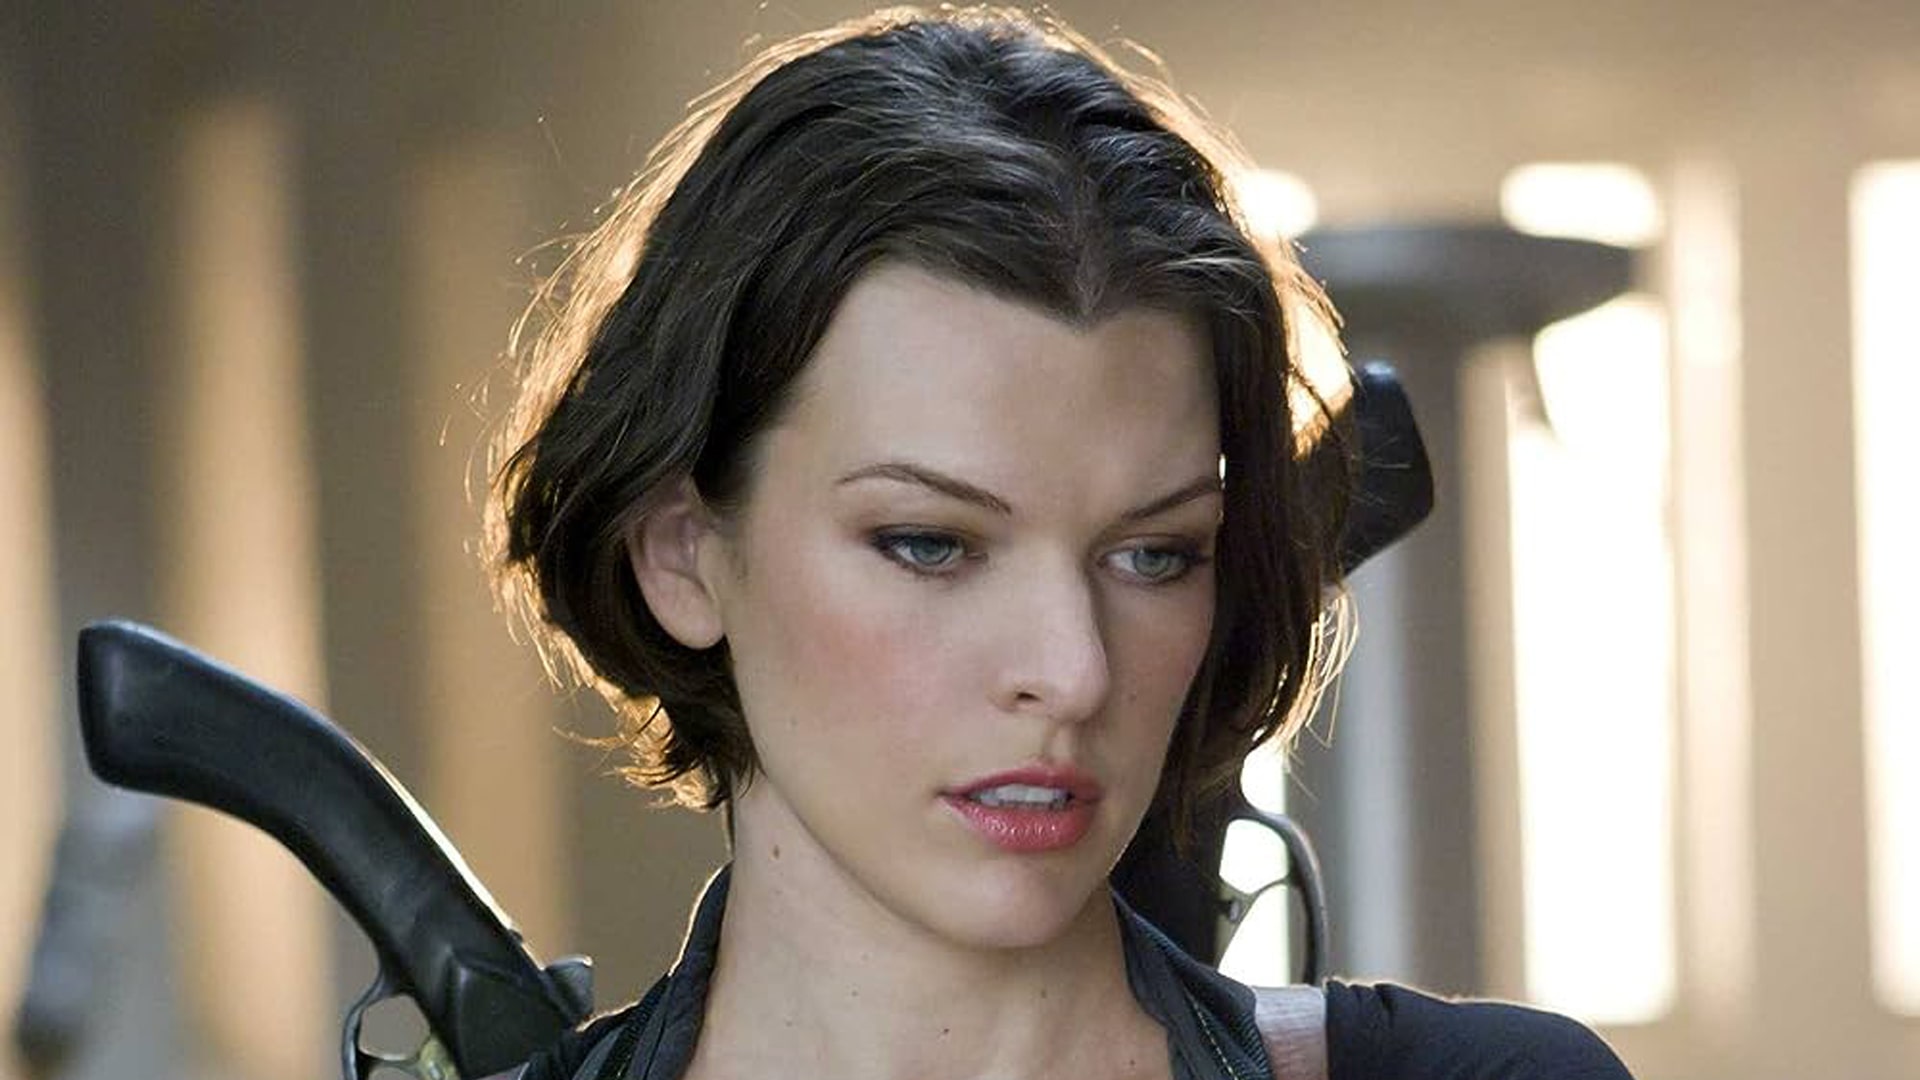 Scene from the film 'Resident Evil: Afterlife', showcasing the cinematic expansion of the game series